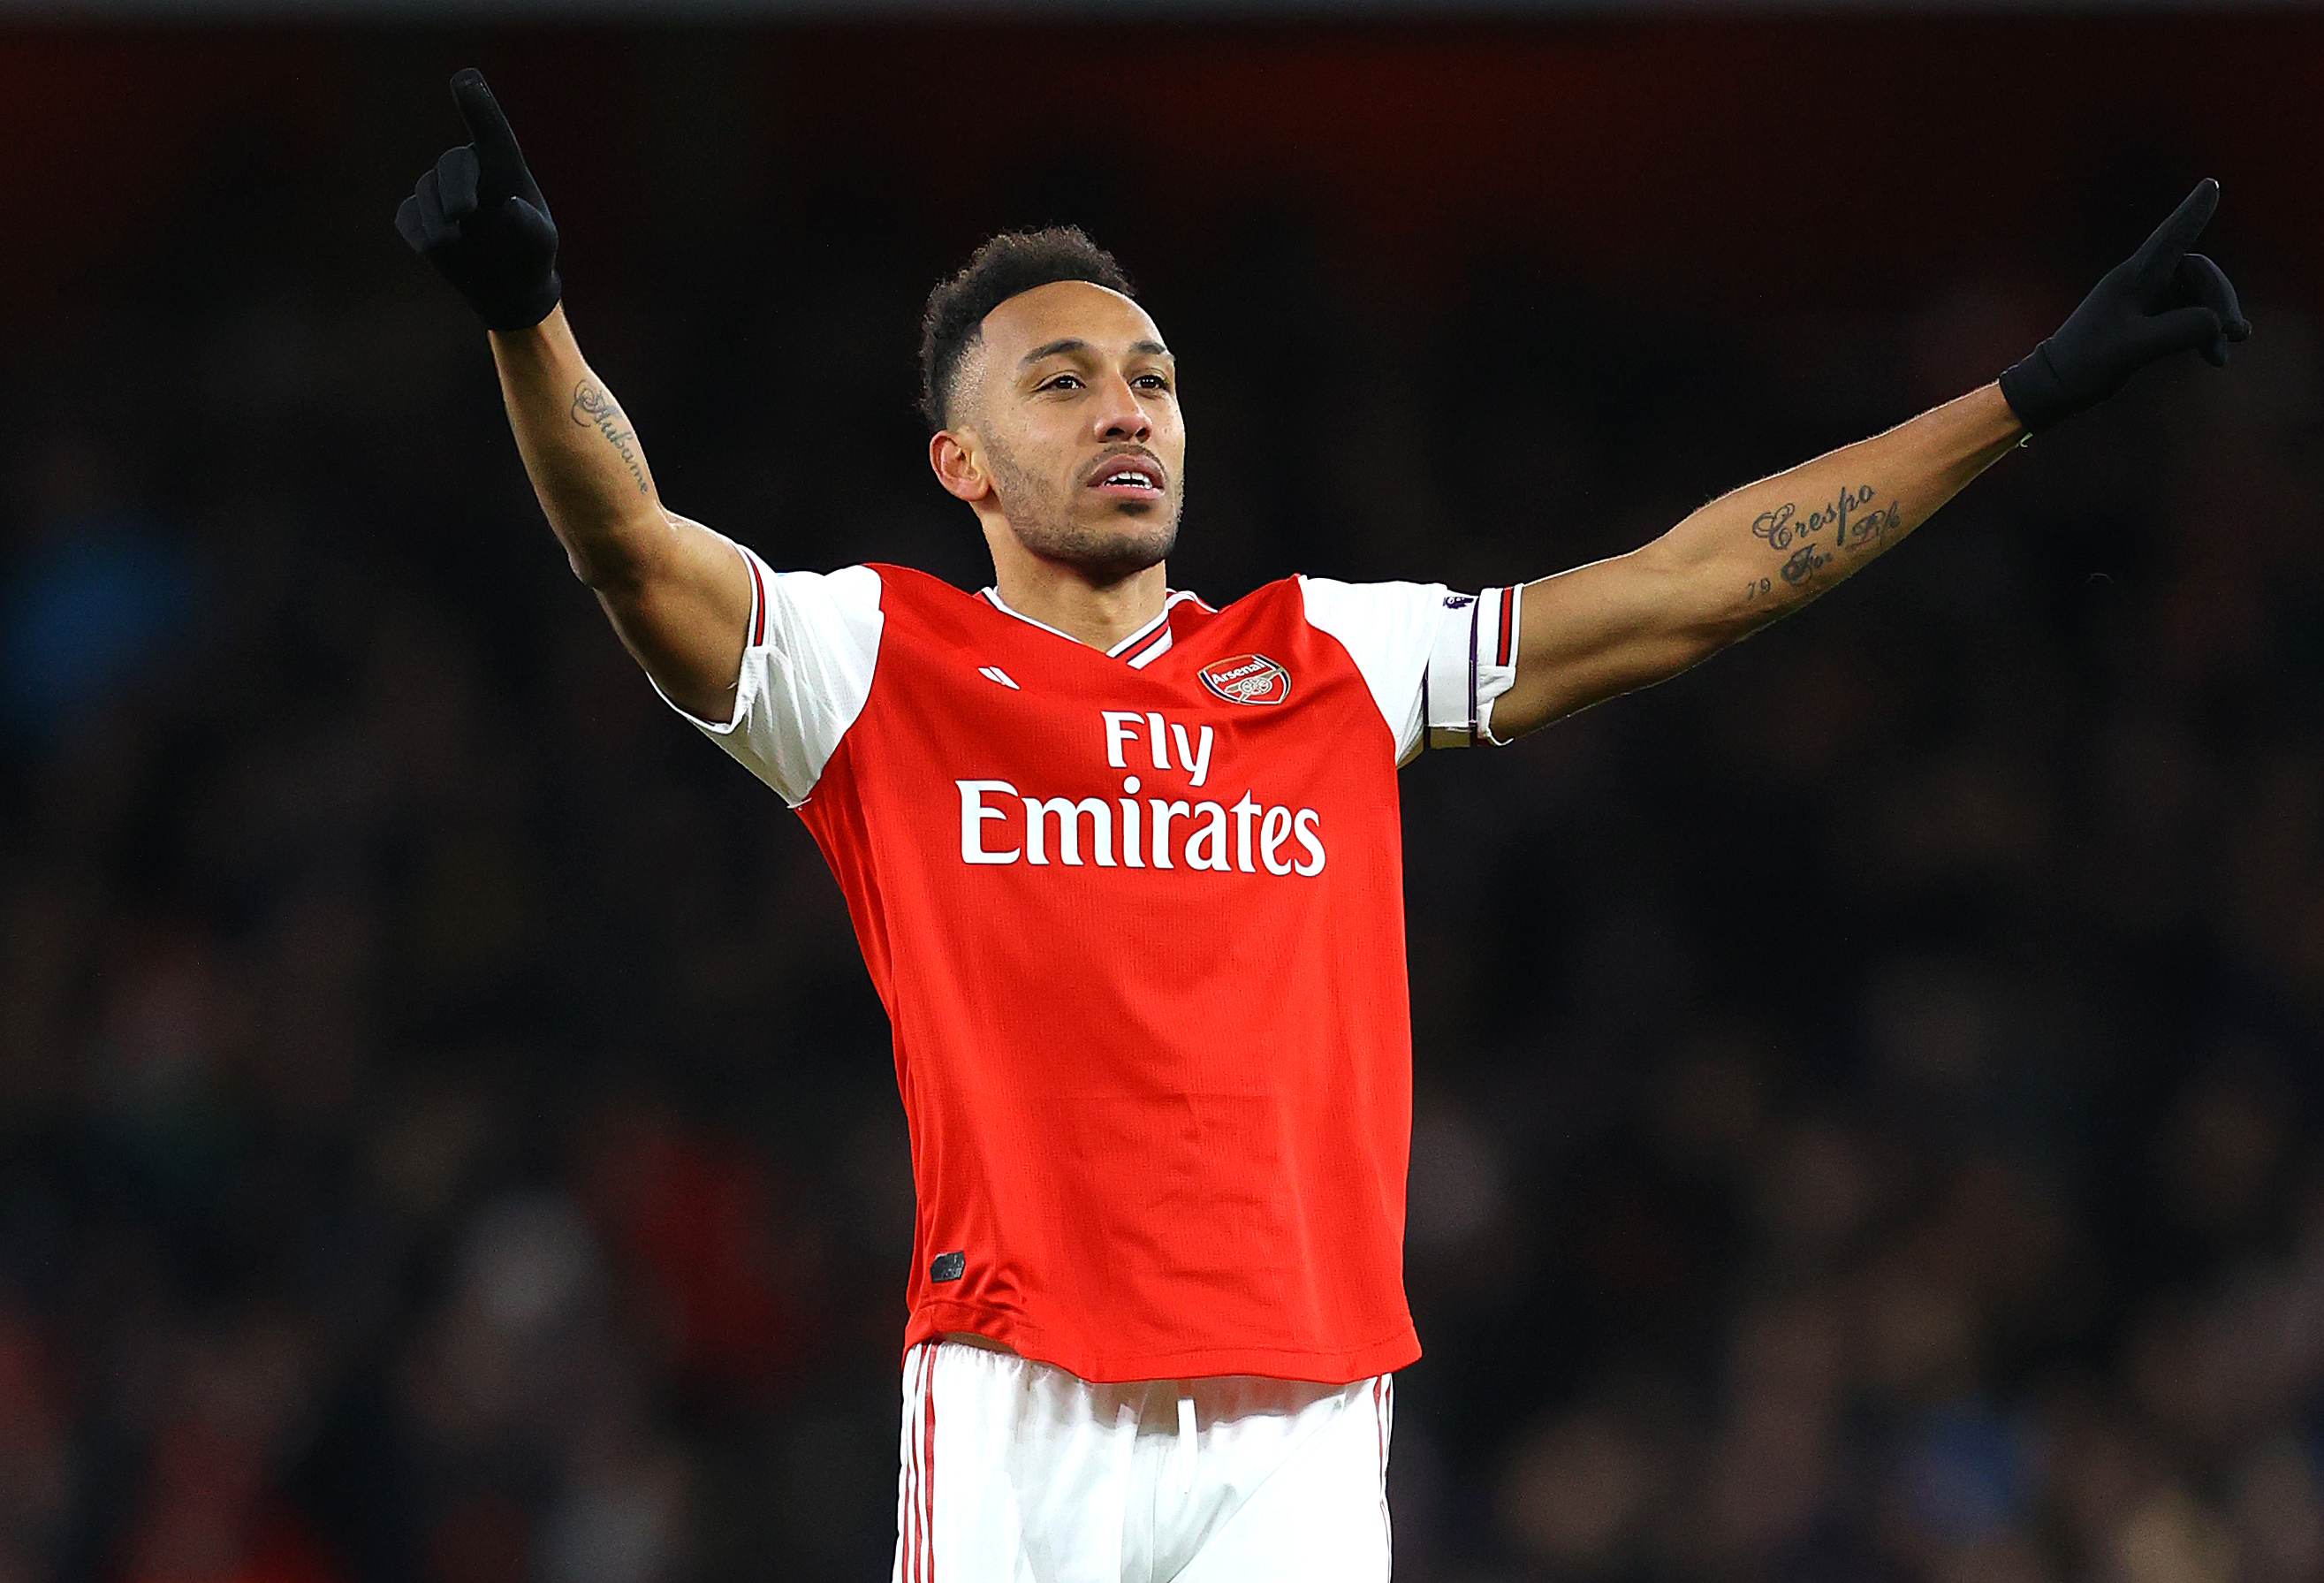 Pierre-Emerick Aubameyang could once again miss out due to personal reasons. (Photo by Richard Heathcote/Getty Images)